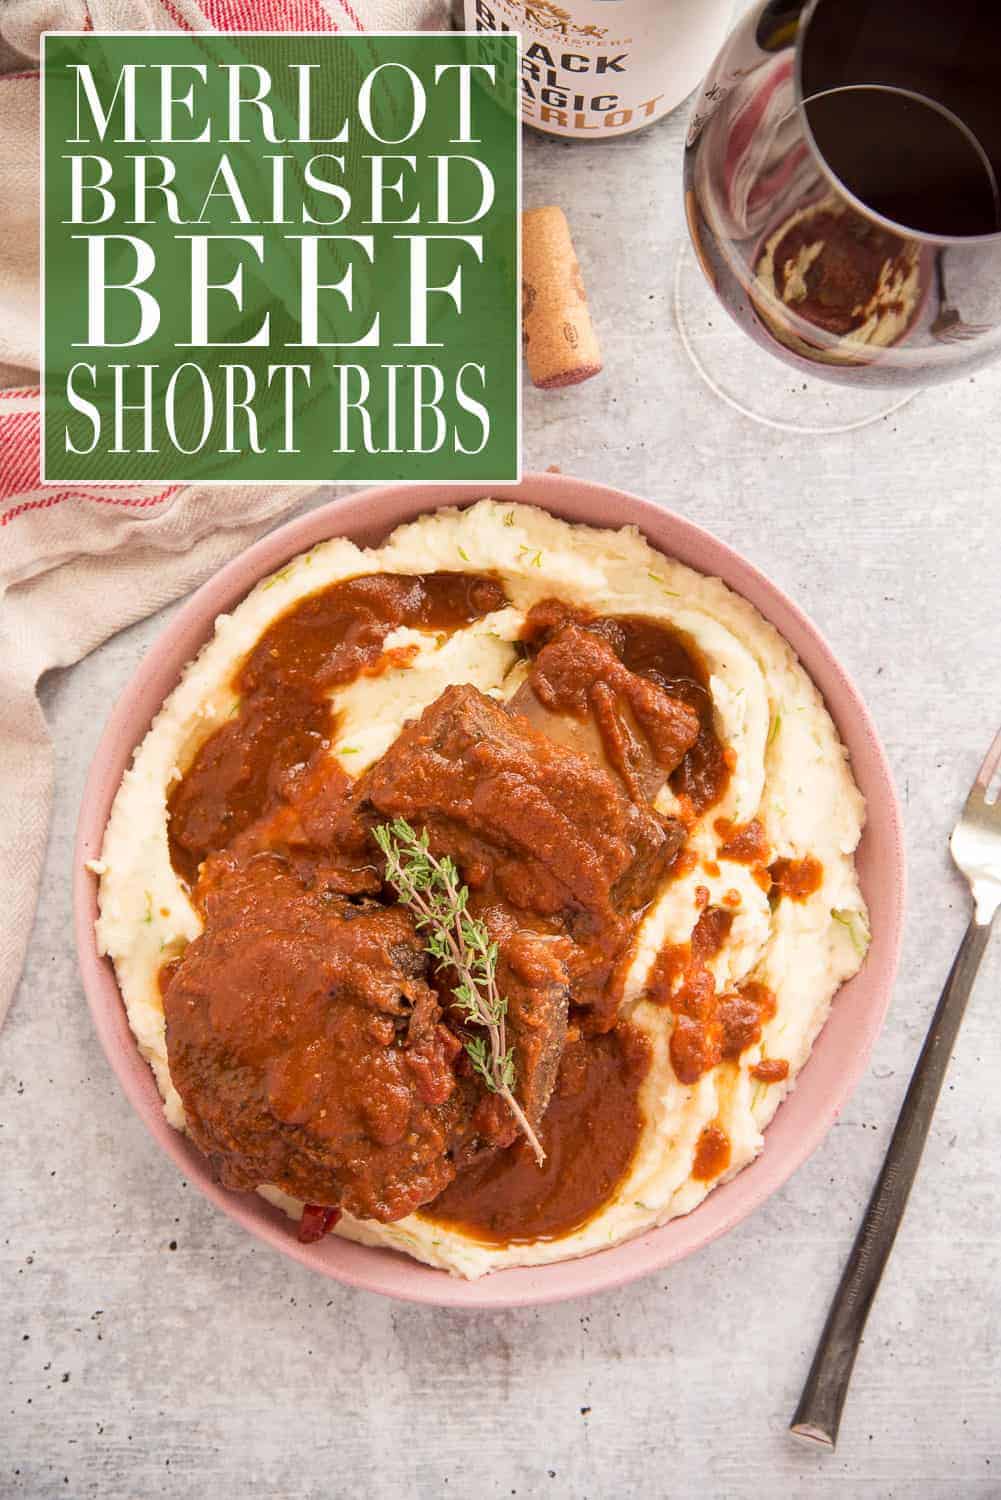 Merlot Braised Beef Short Ribs are succulent beef ribs simmered low and slow in a rich merlot and tomato-based sauce. This is the ultimate comfort dish and it's a one pot recipe, too! Serve it over mashed potatoes, boiled pasta, or creamy grits. #beefshortribs #shortribsrecipe #beefrecipe #cookingbeef #beef #merlot #cookingwithwine #braising via @ediblesense